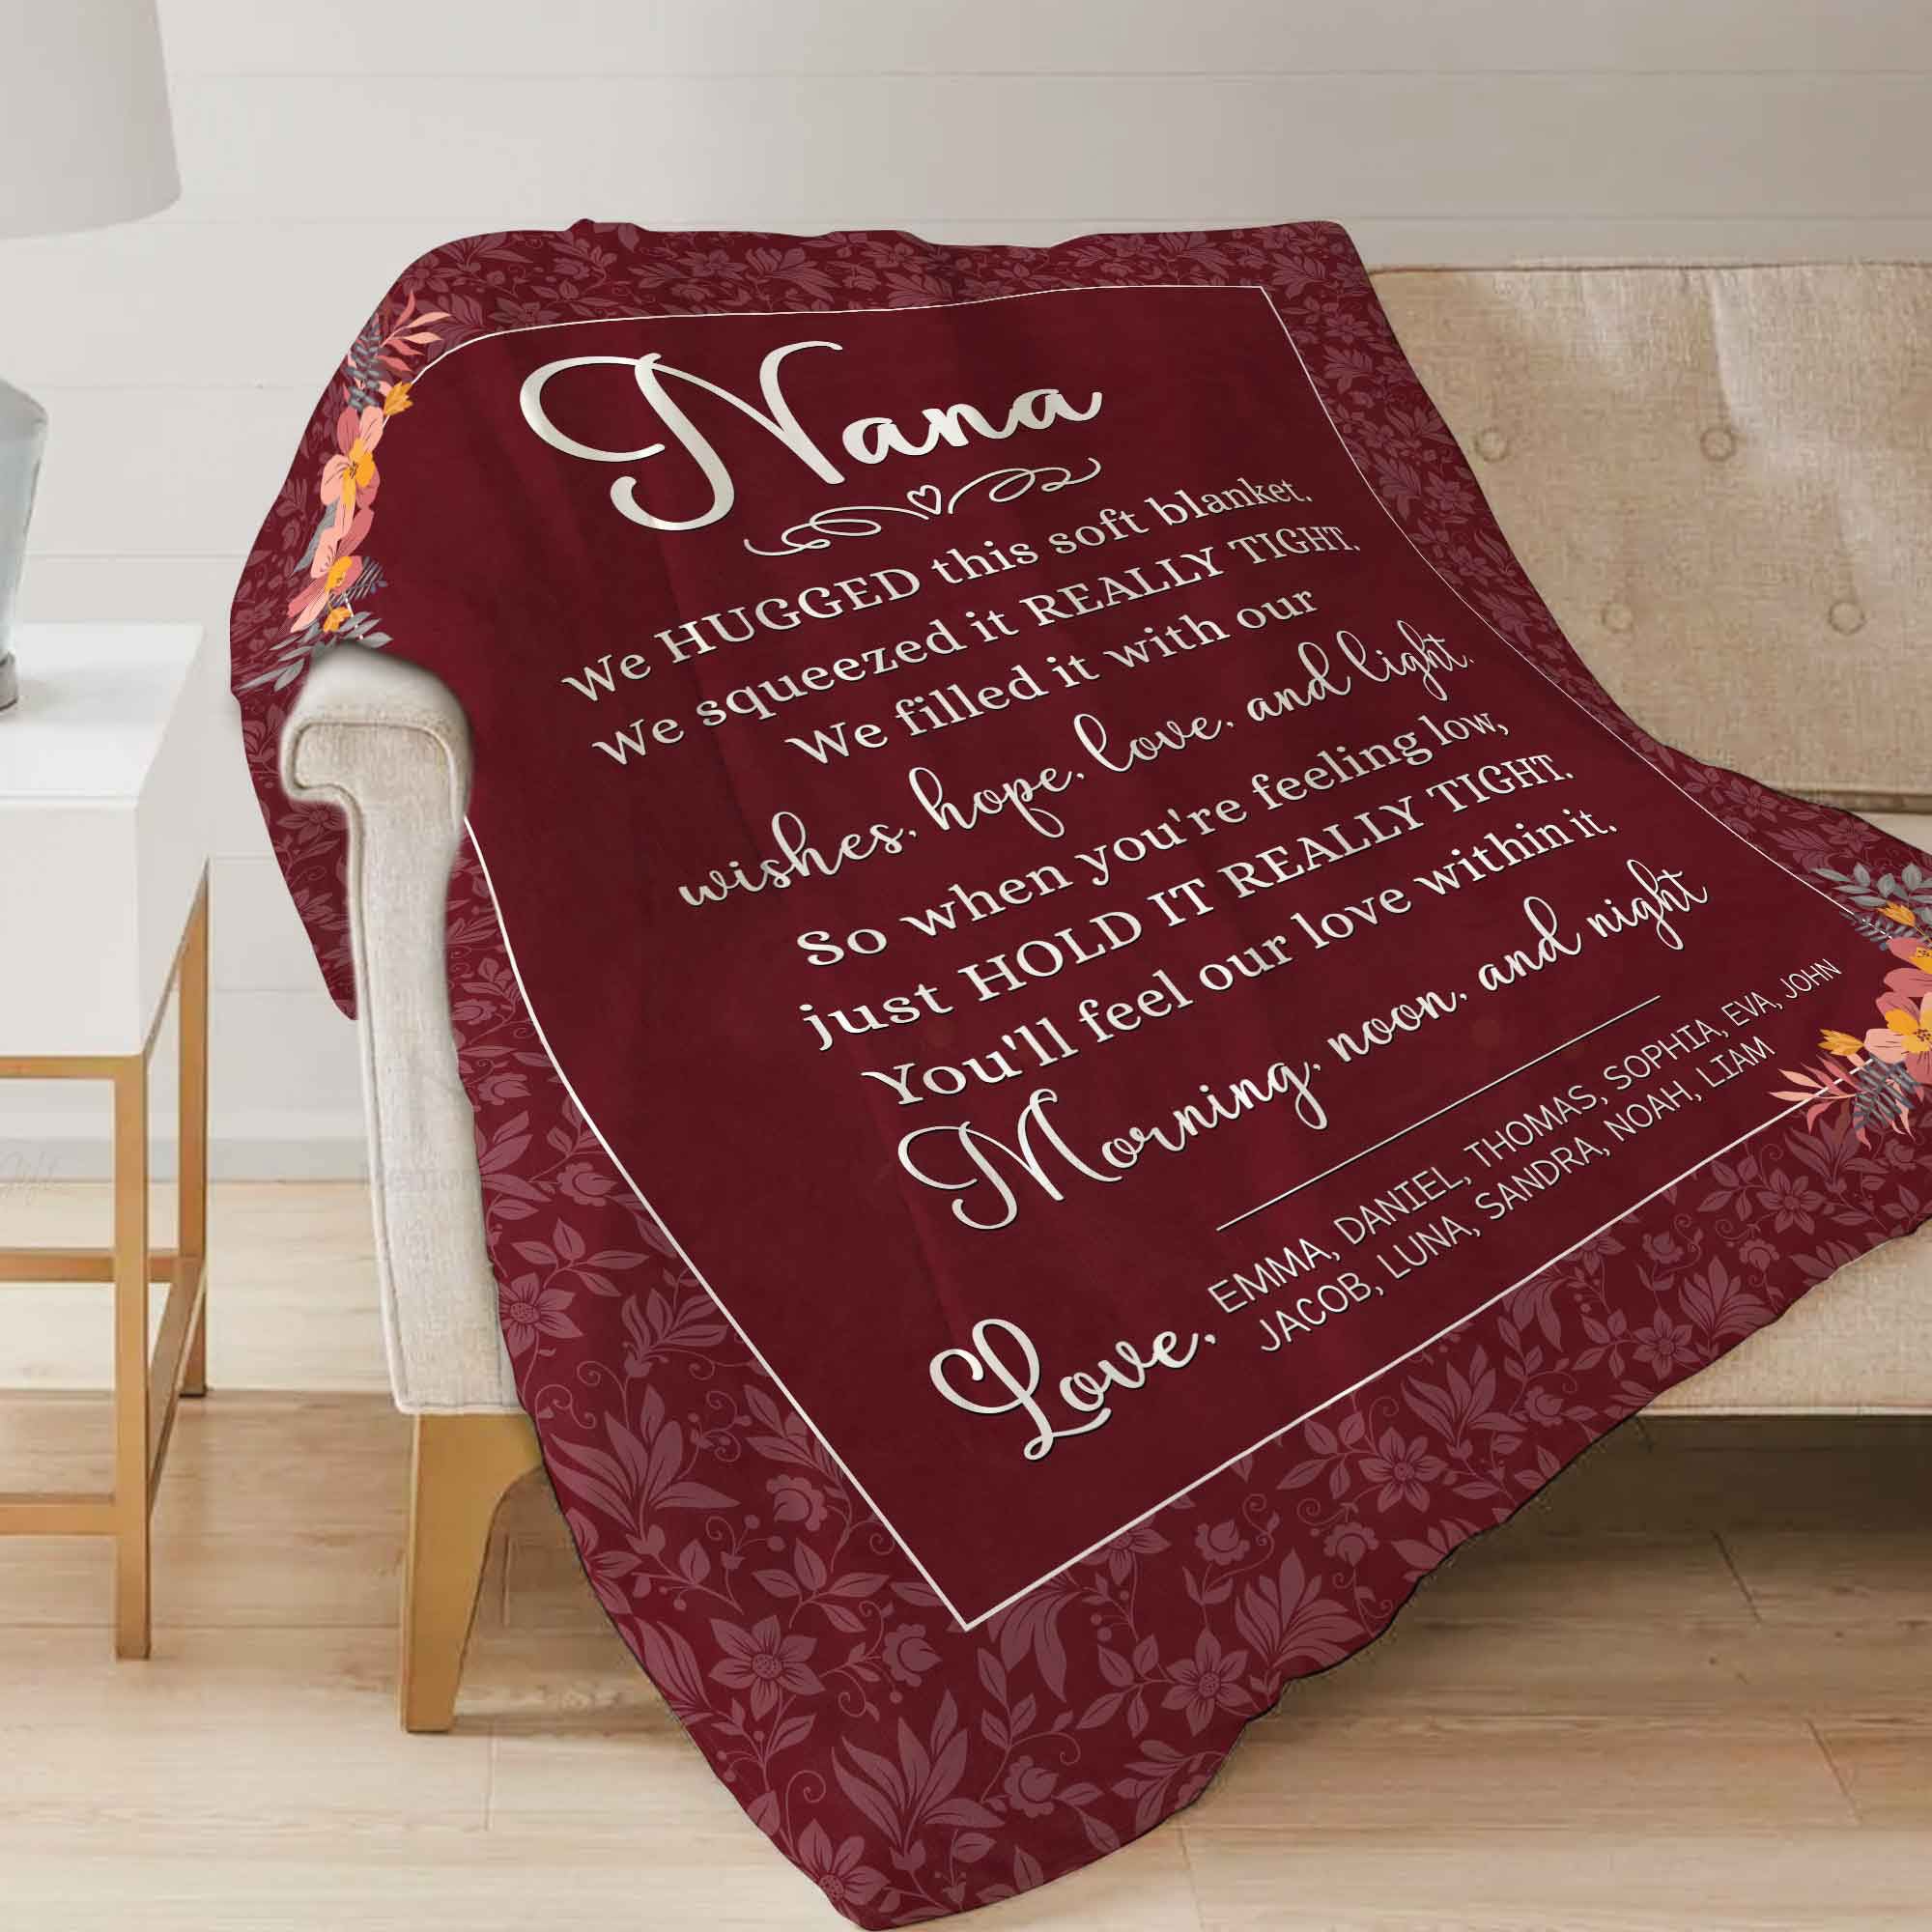 grandmother blankets personalized